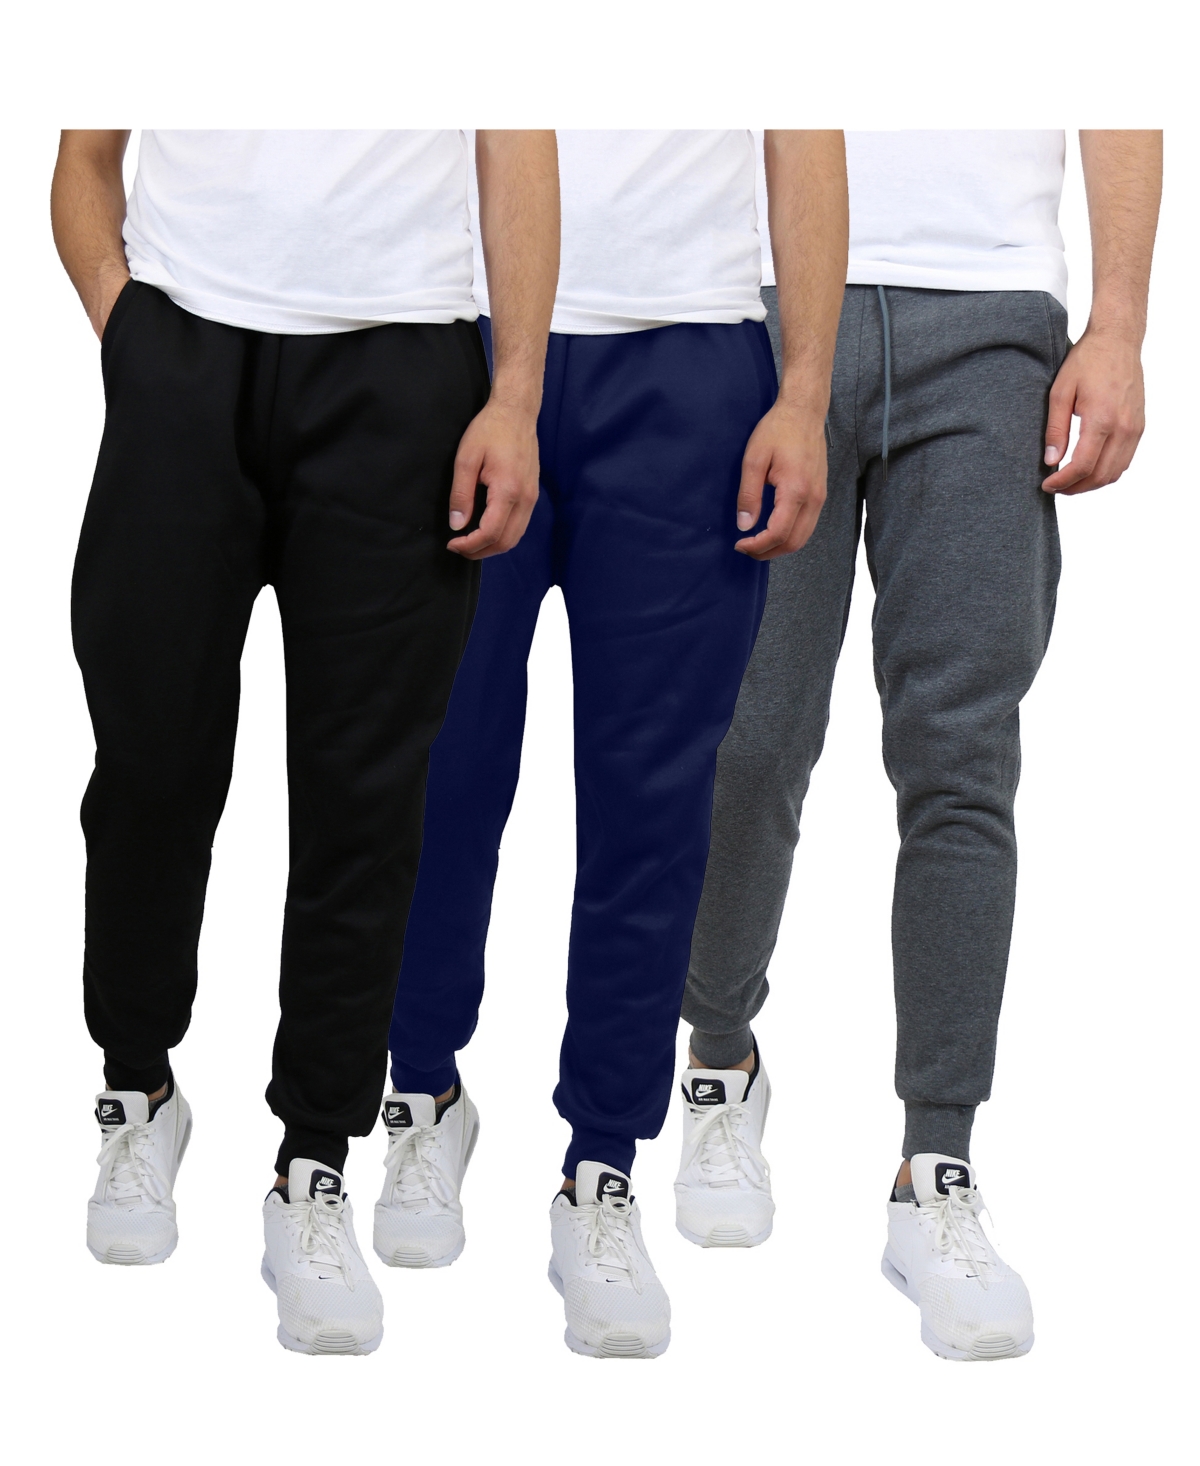 Men's Modern Fit Heavyweight Classic Fleece Jogger Sweatpants- 3 Pack - Navy-Olive-Red